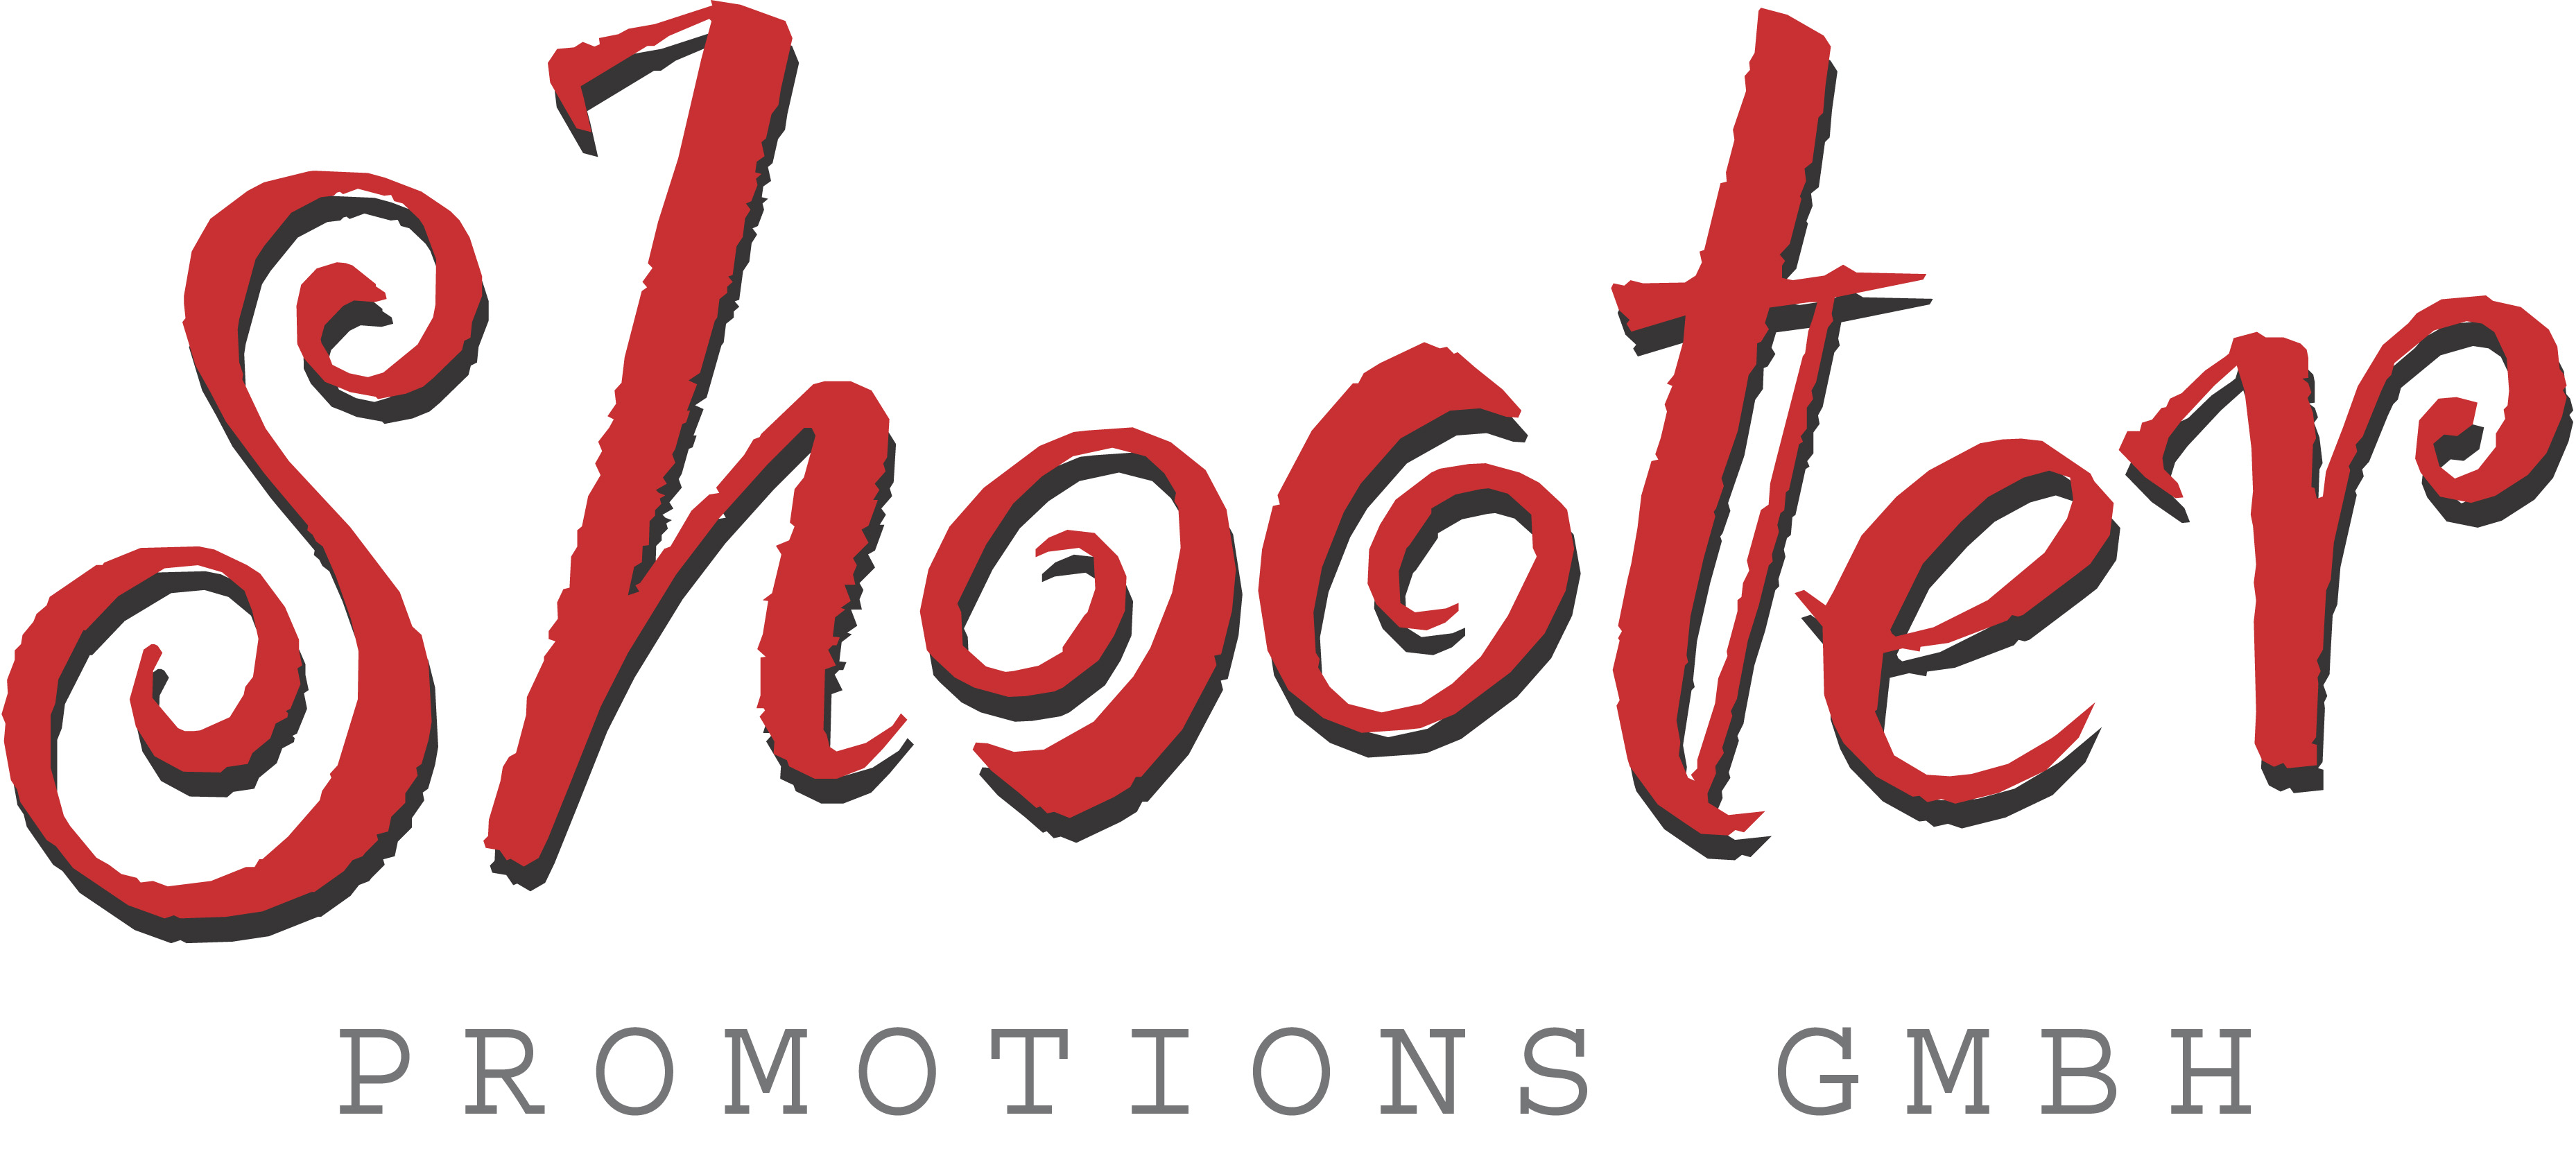 Shooter Promotions GmbH